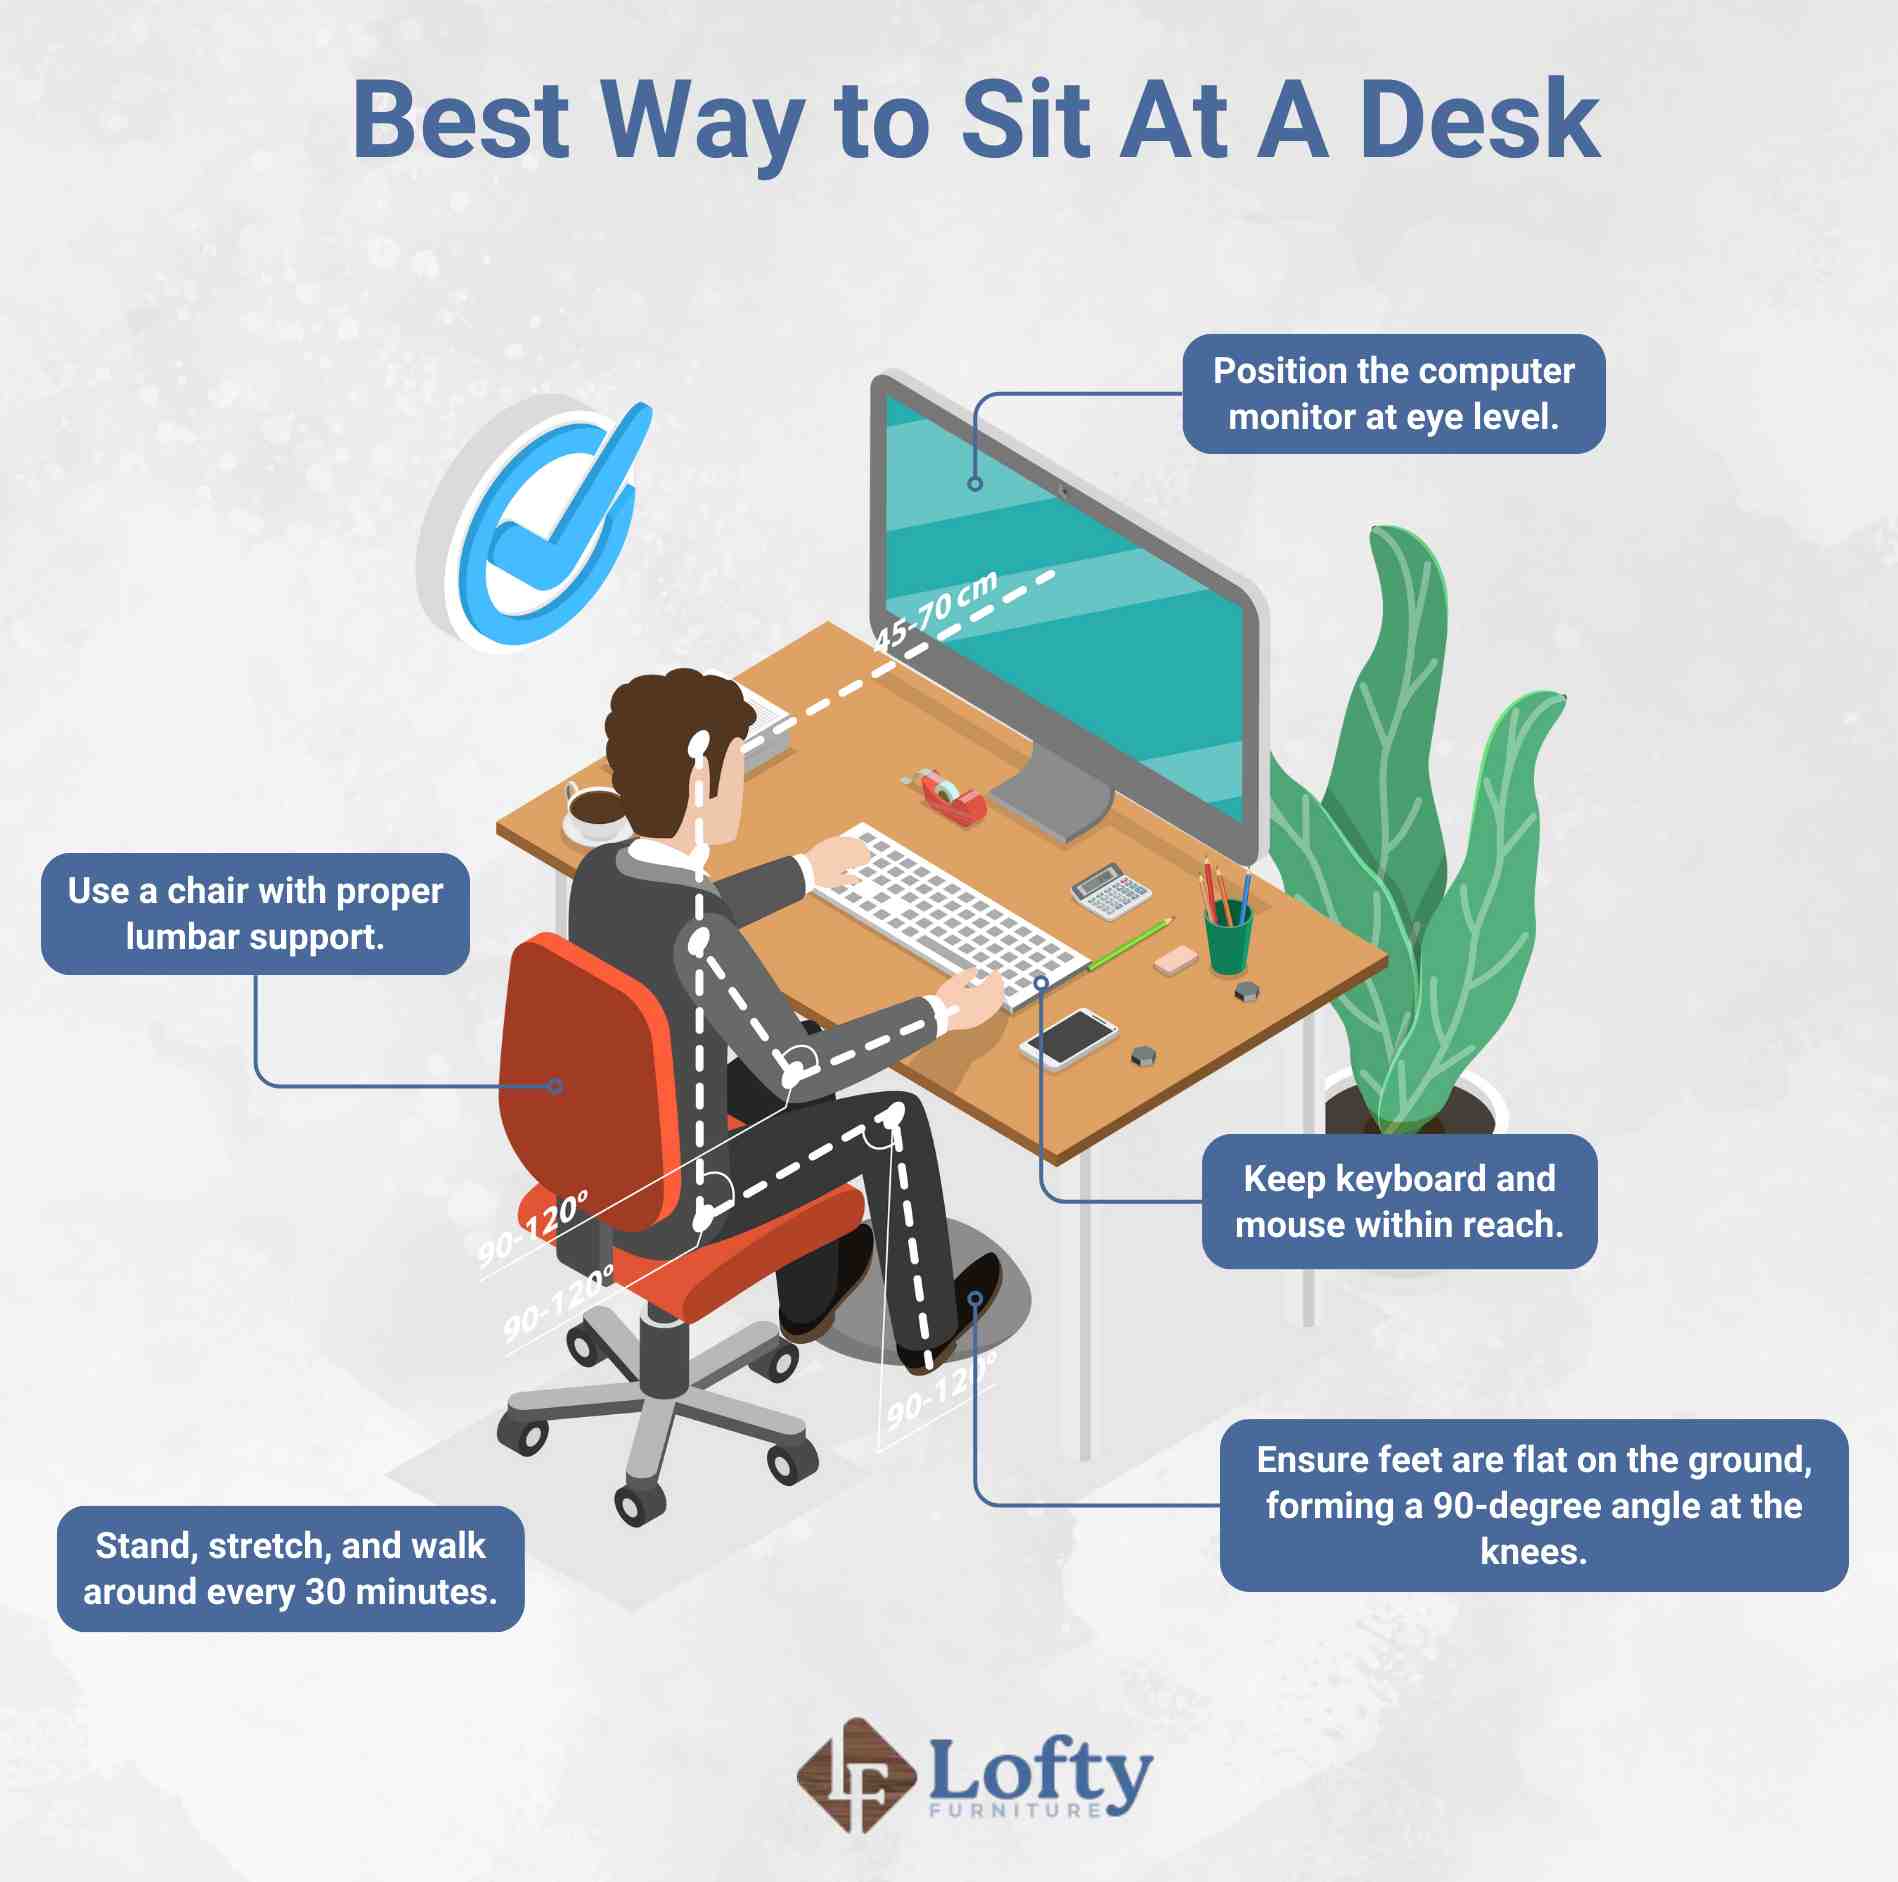 An illustration on the best way to sit at a desk.